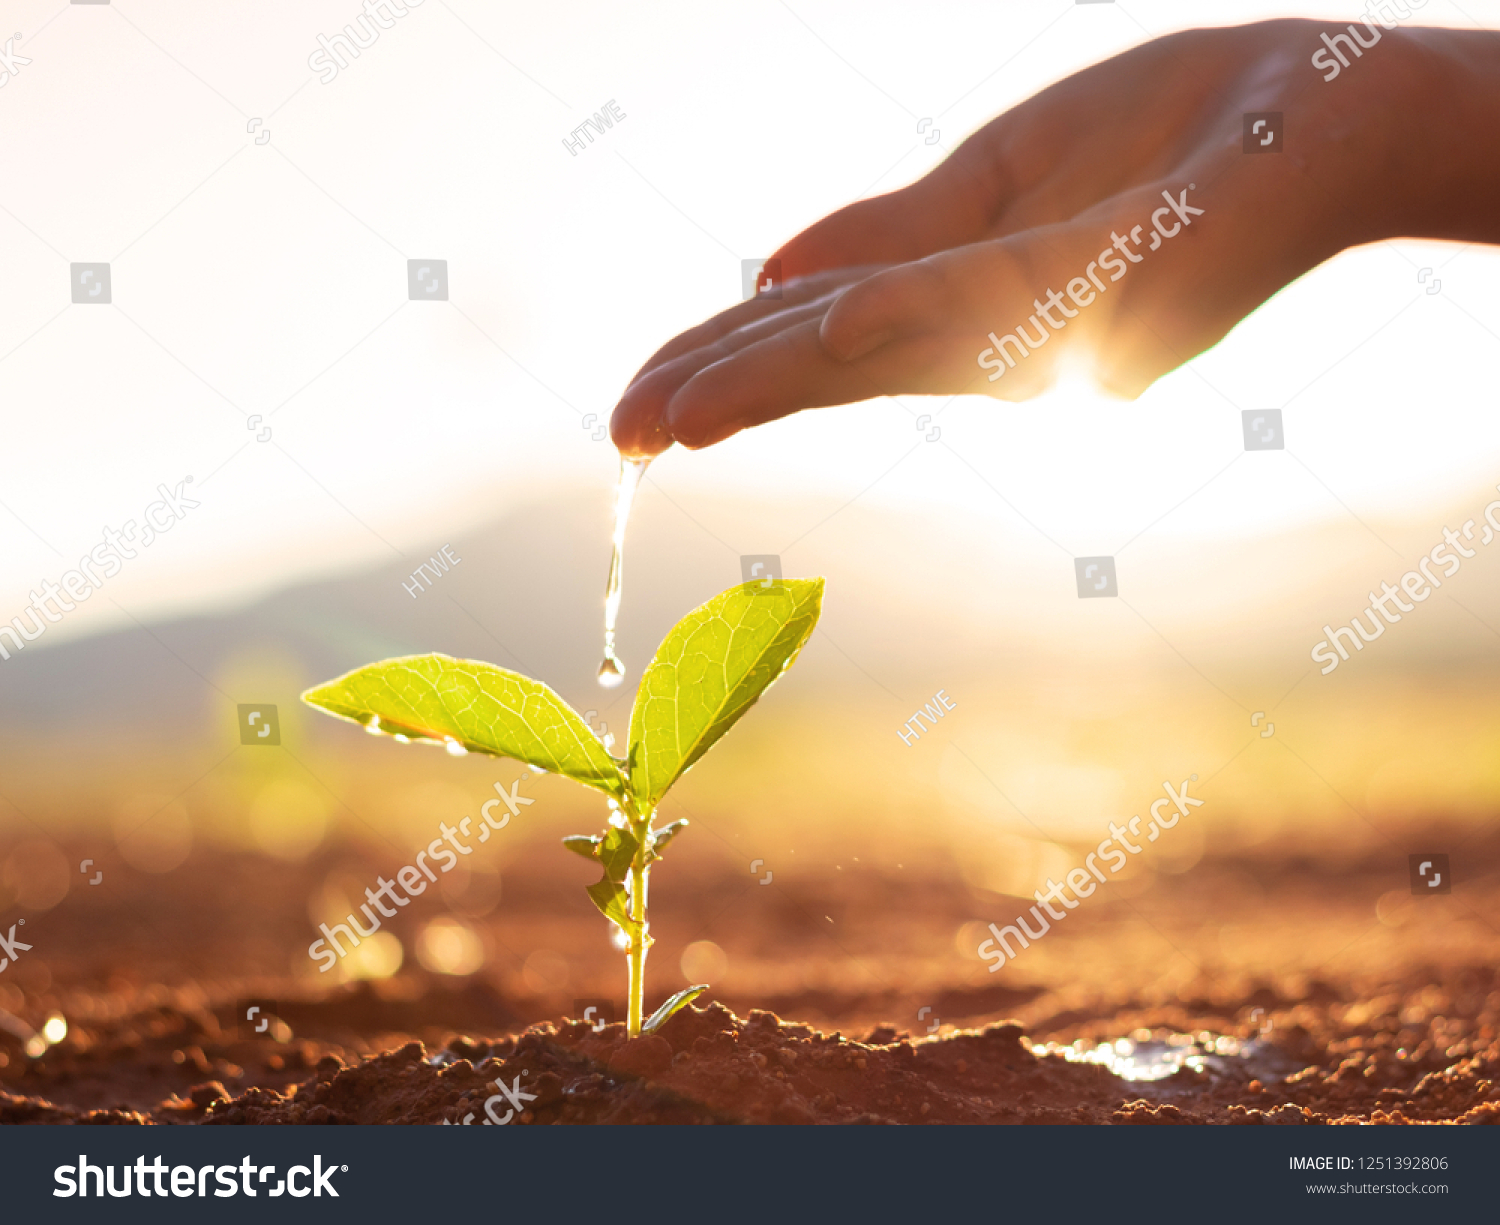 Hand nurturing and watering young baby plants growing in germination sequence on fertile soil at sunset background #1251392806